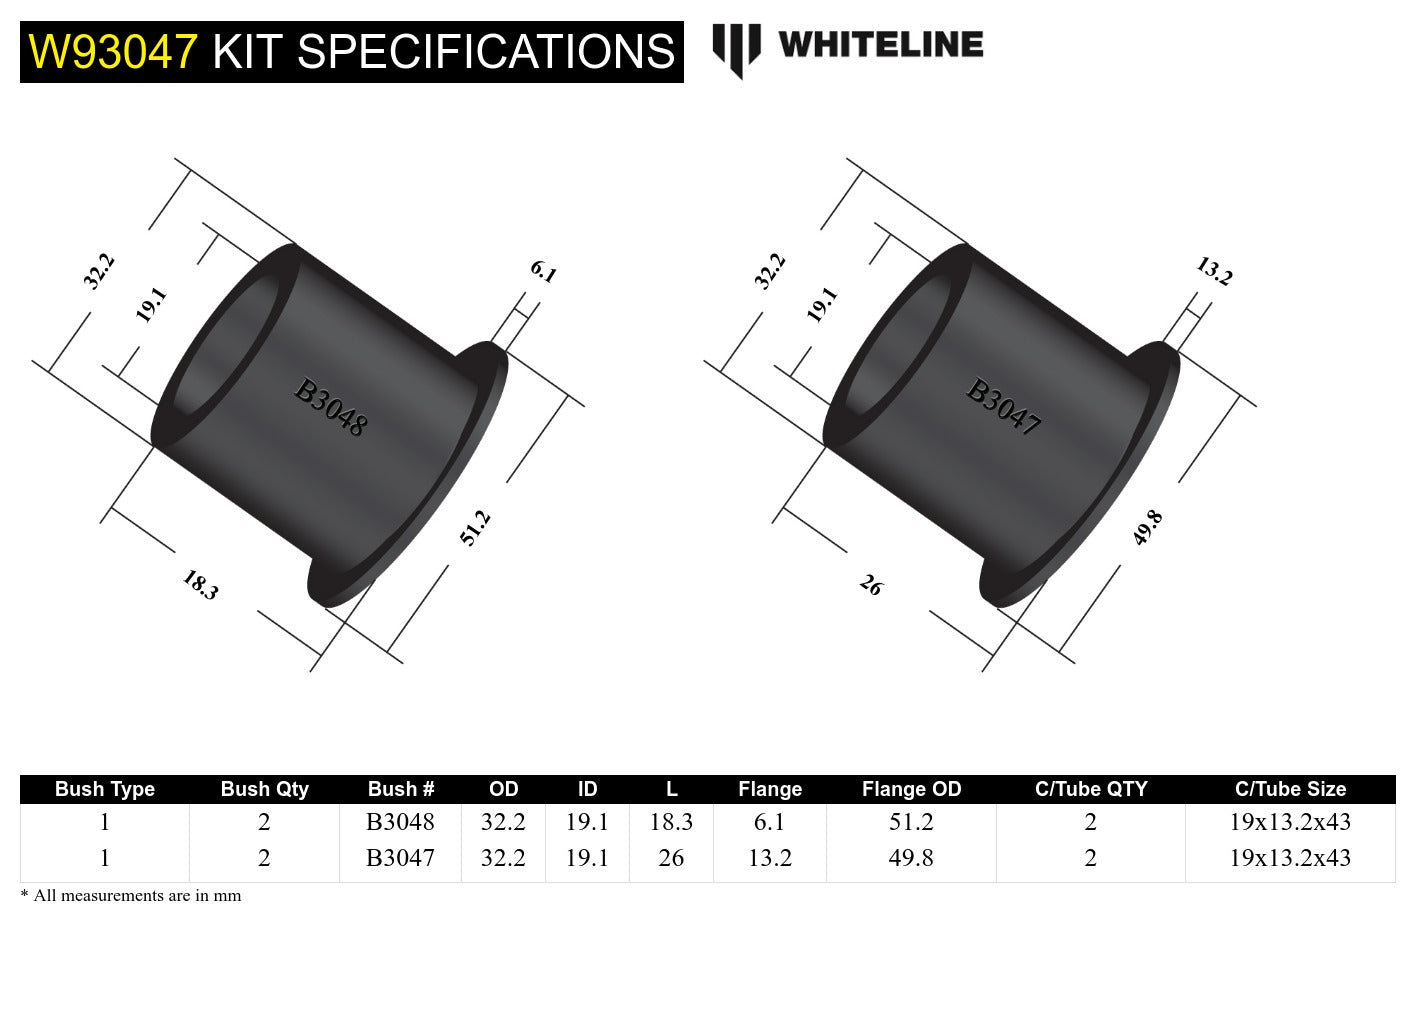 Differential - Mount Front Bushing Kit